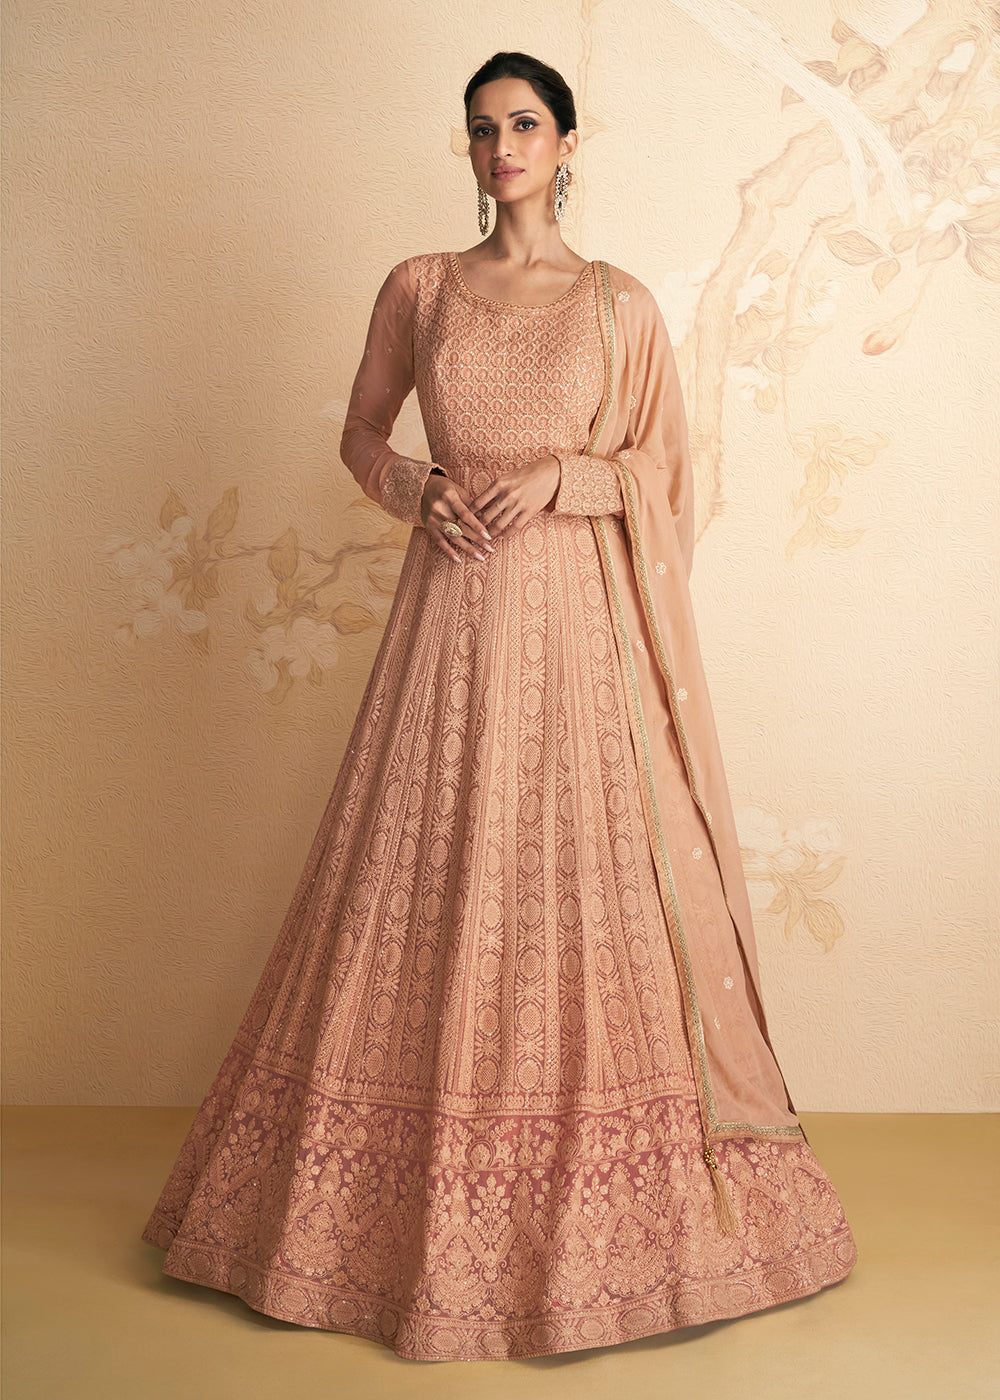 Buy Now Chikankari Style Peach Traditional Work Festive Anarkali Gown Online in USA, UK, Australia, New Zealand, Canada & Worldwide at Empress Clothing. 